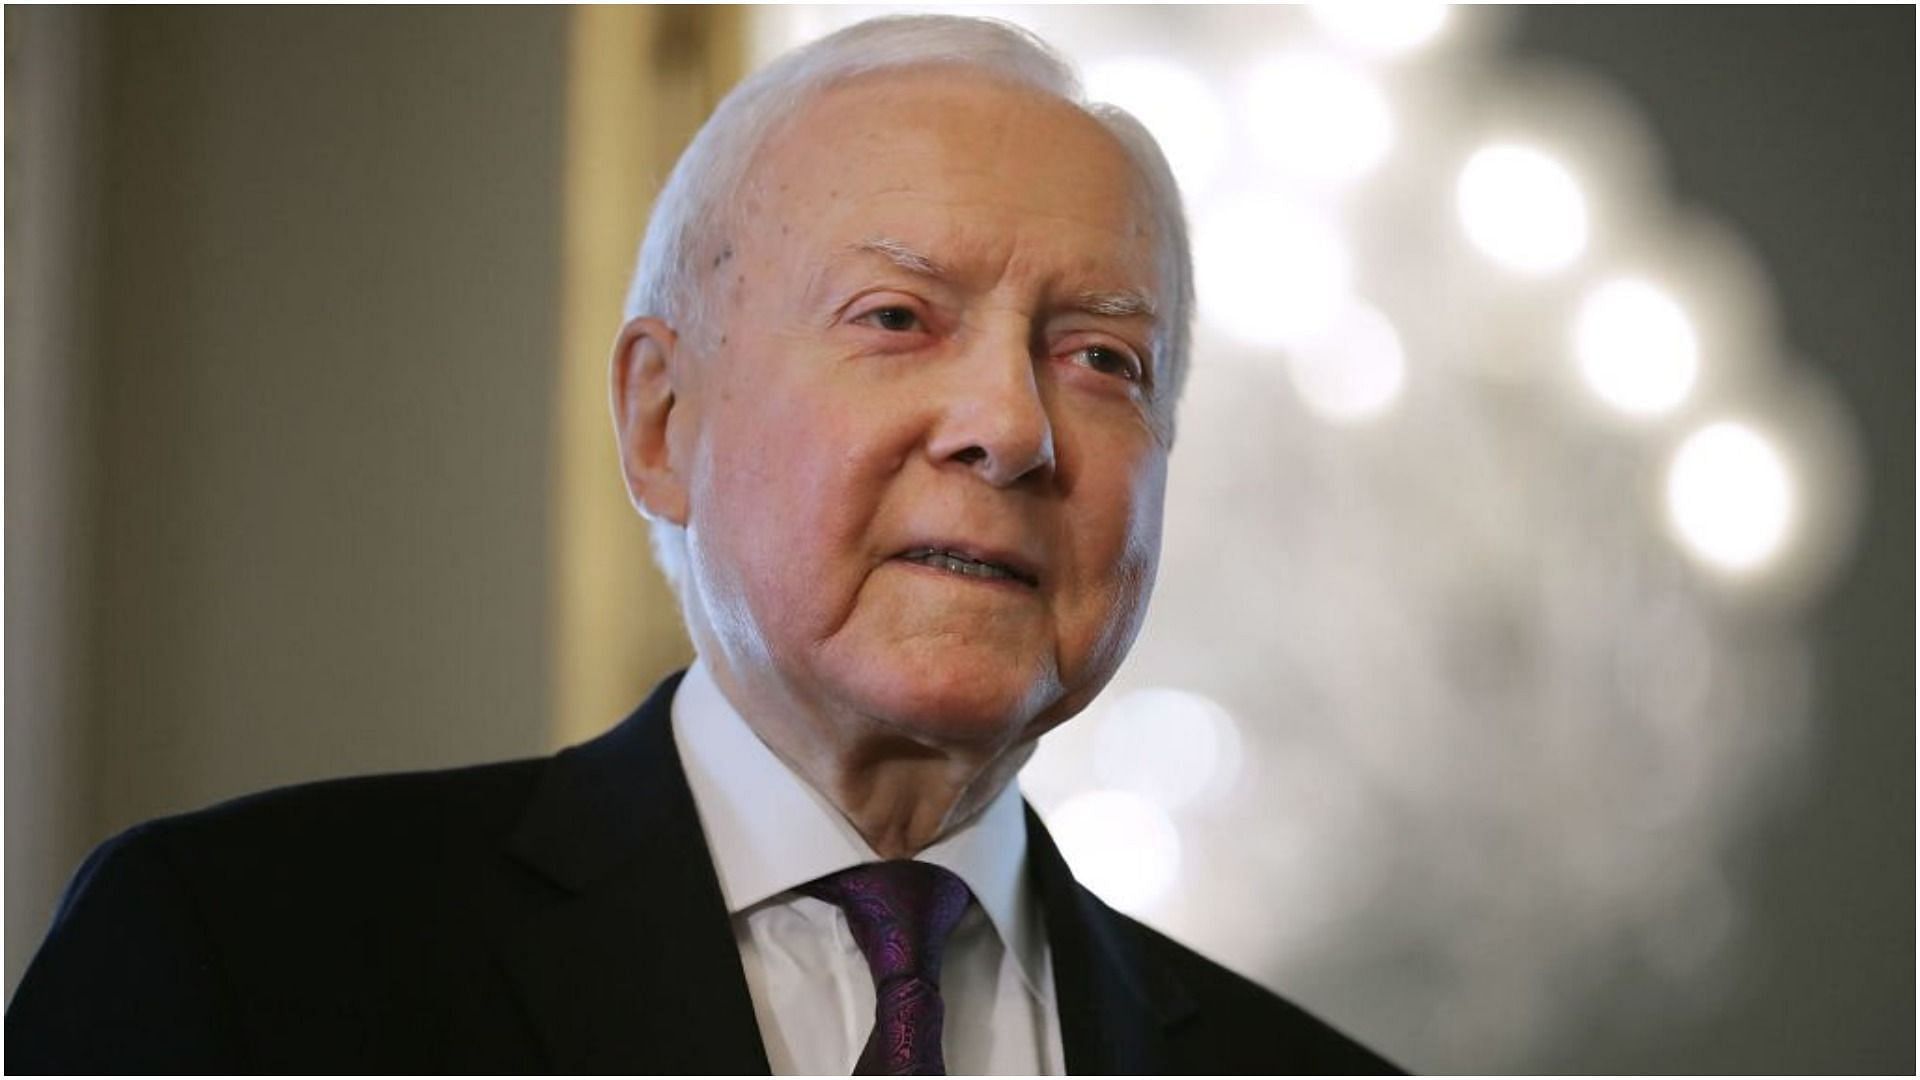 Orrin G. Hatch served as a United States Senator from Utah from 1977 to 2019 (Image via Chip Somodevilla/Getty Images)